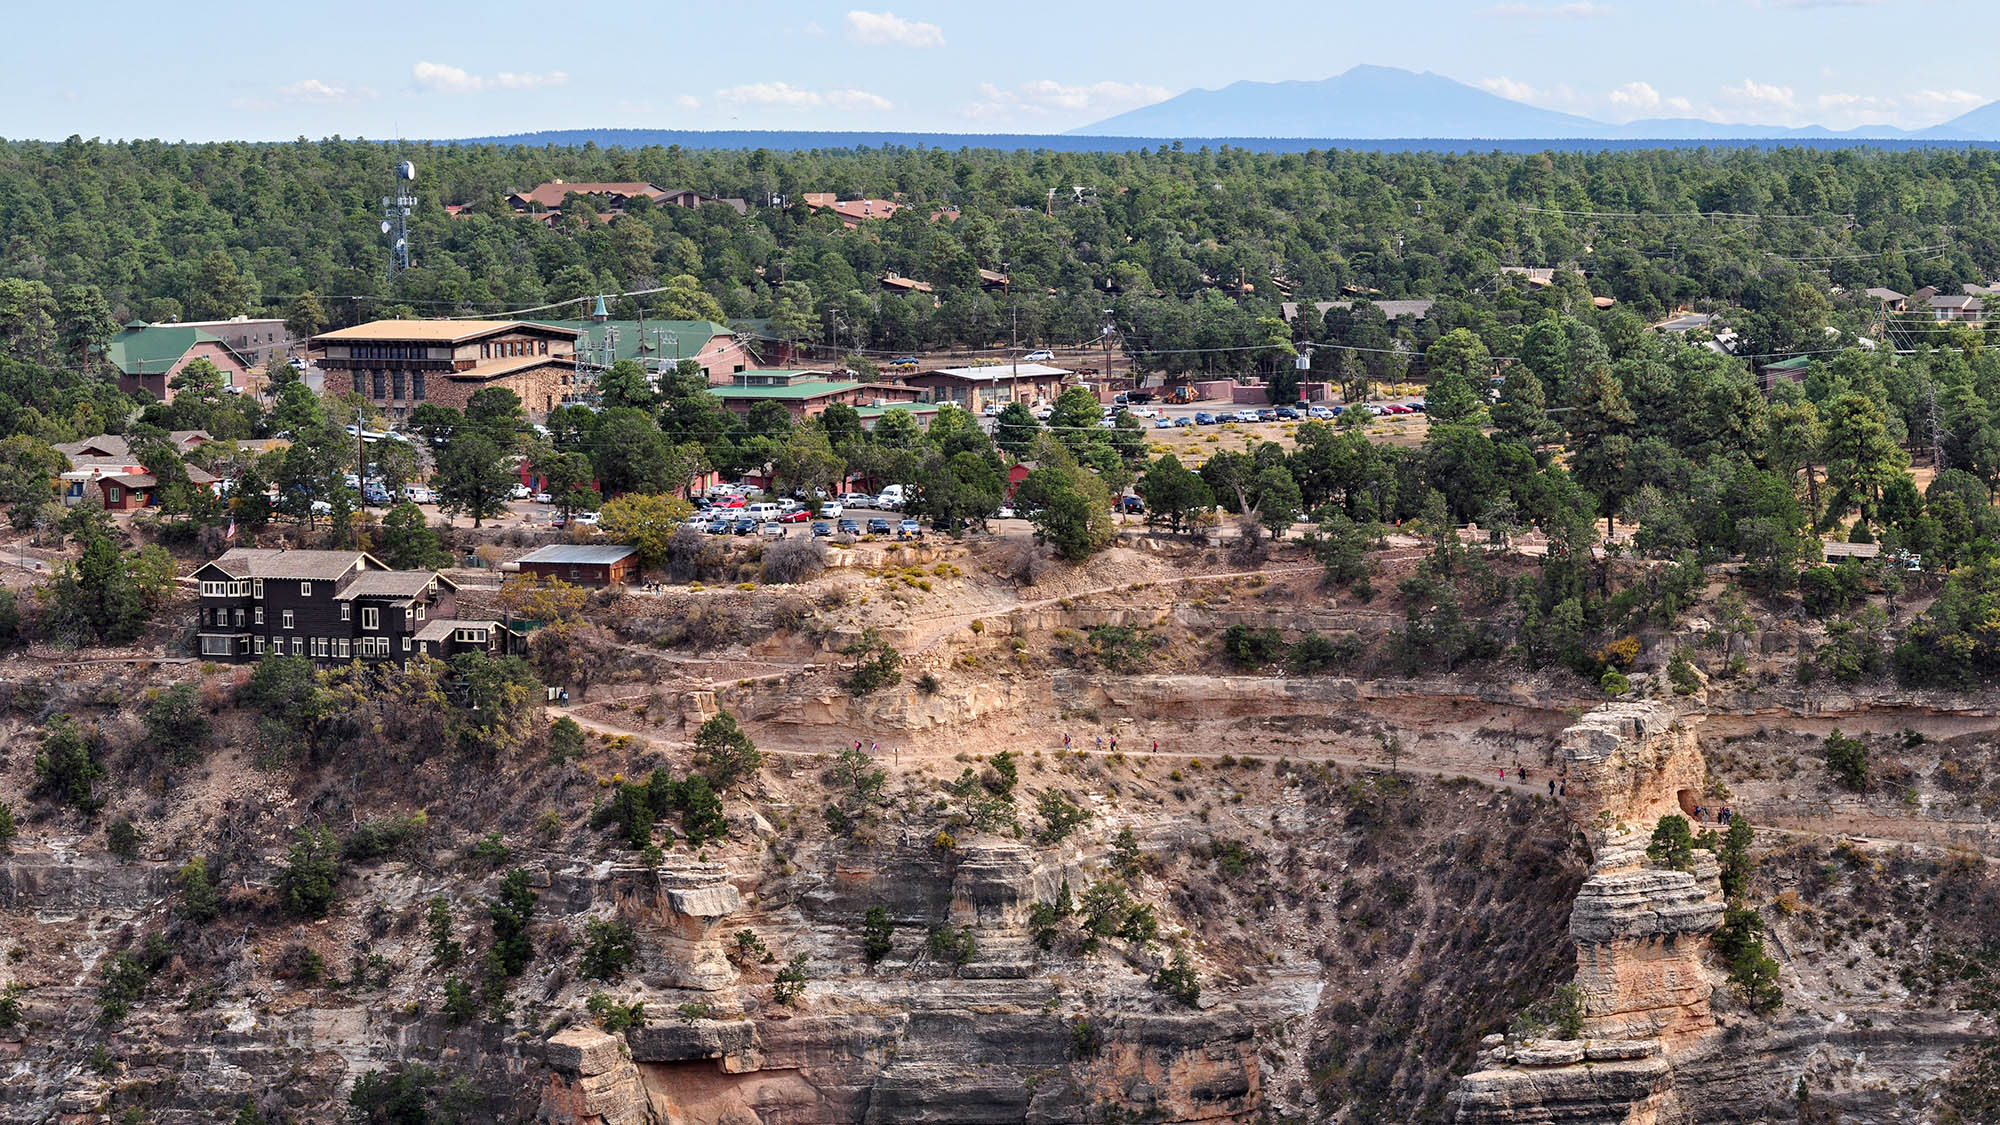 cars parked between buildings in a small village built on the edge of an almost sheer cliff. Several hundred feet of a backcountry trail is visible as it descends into the canyon.